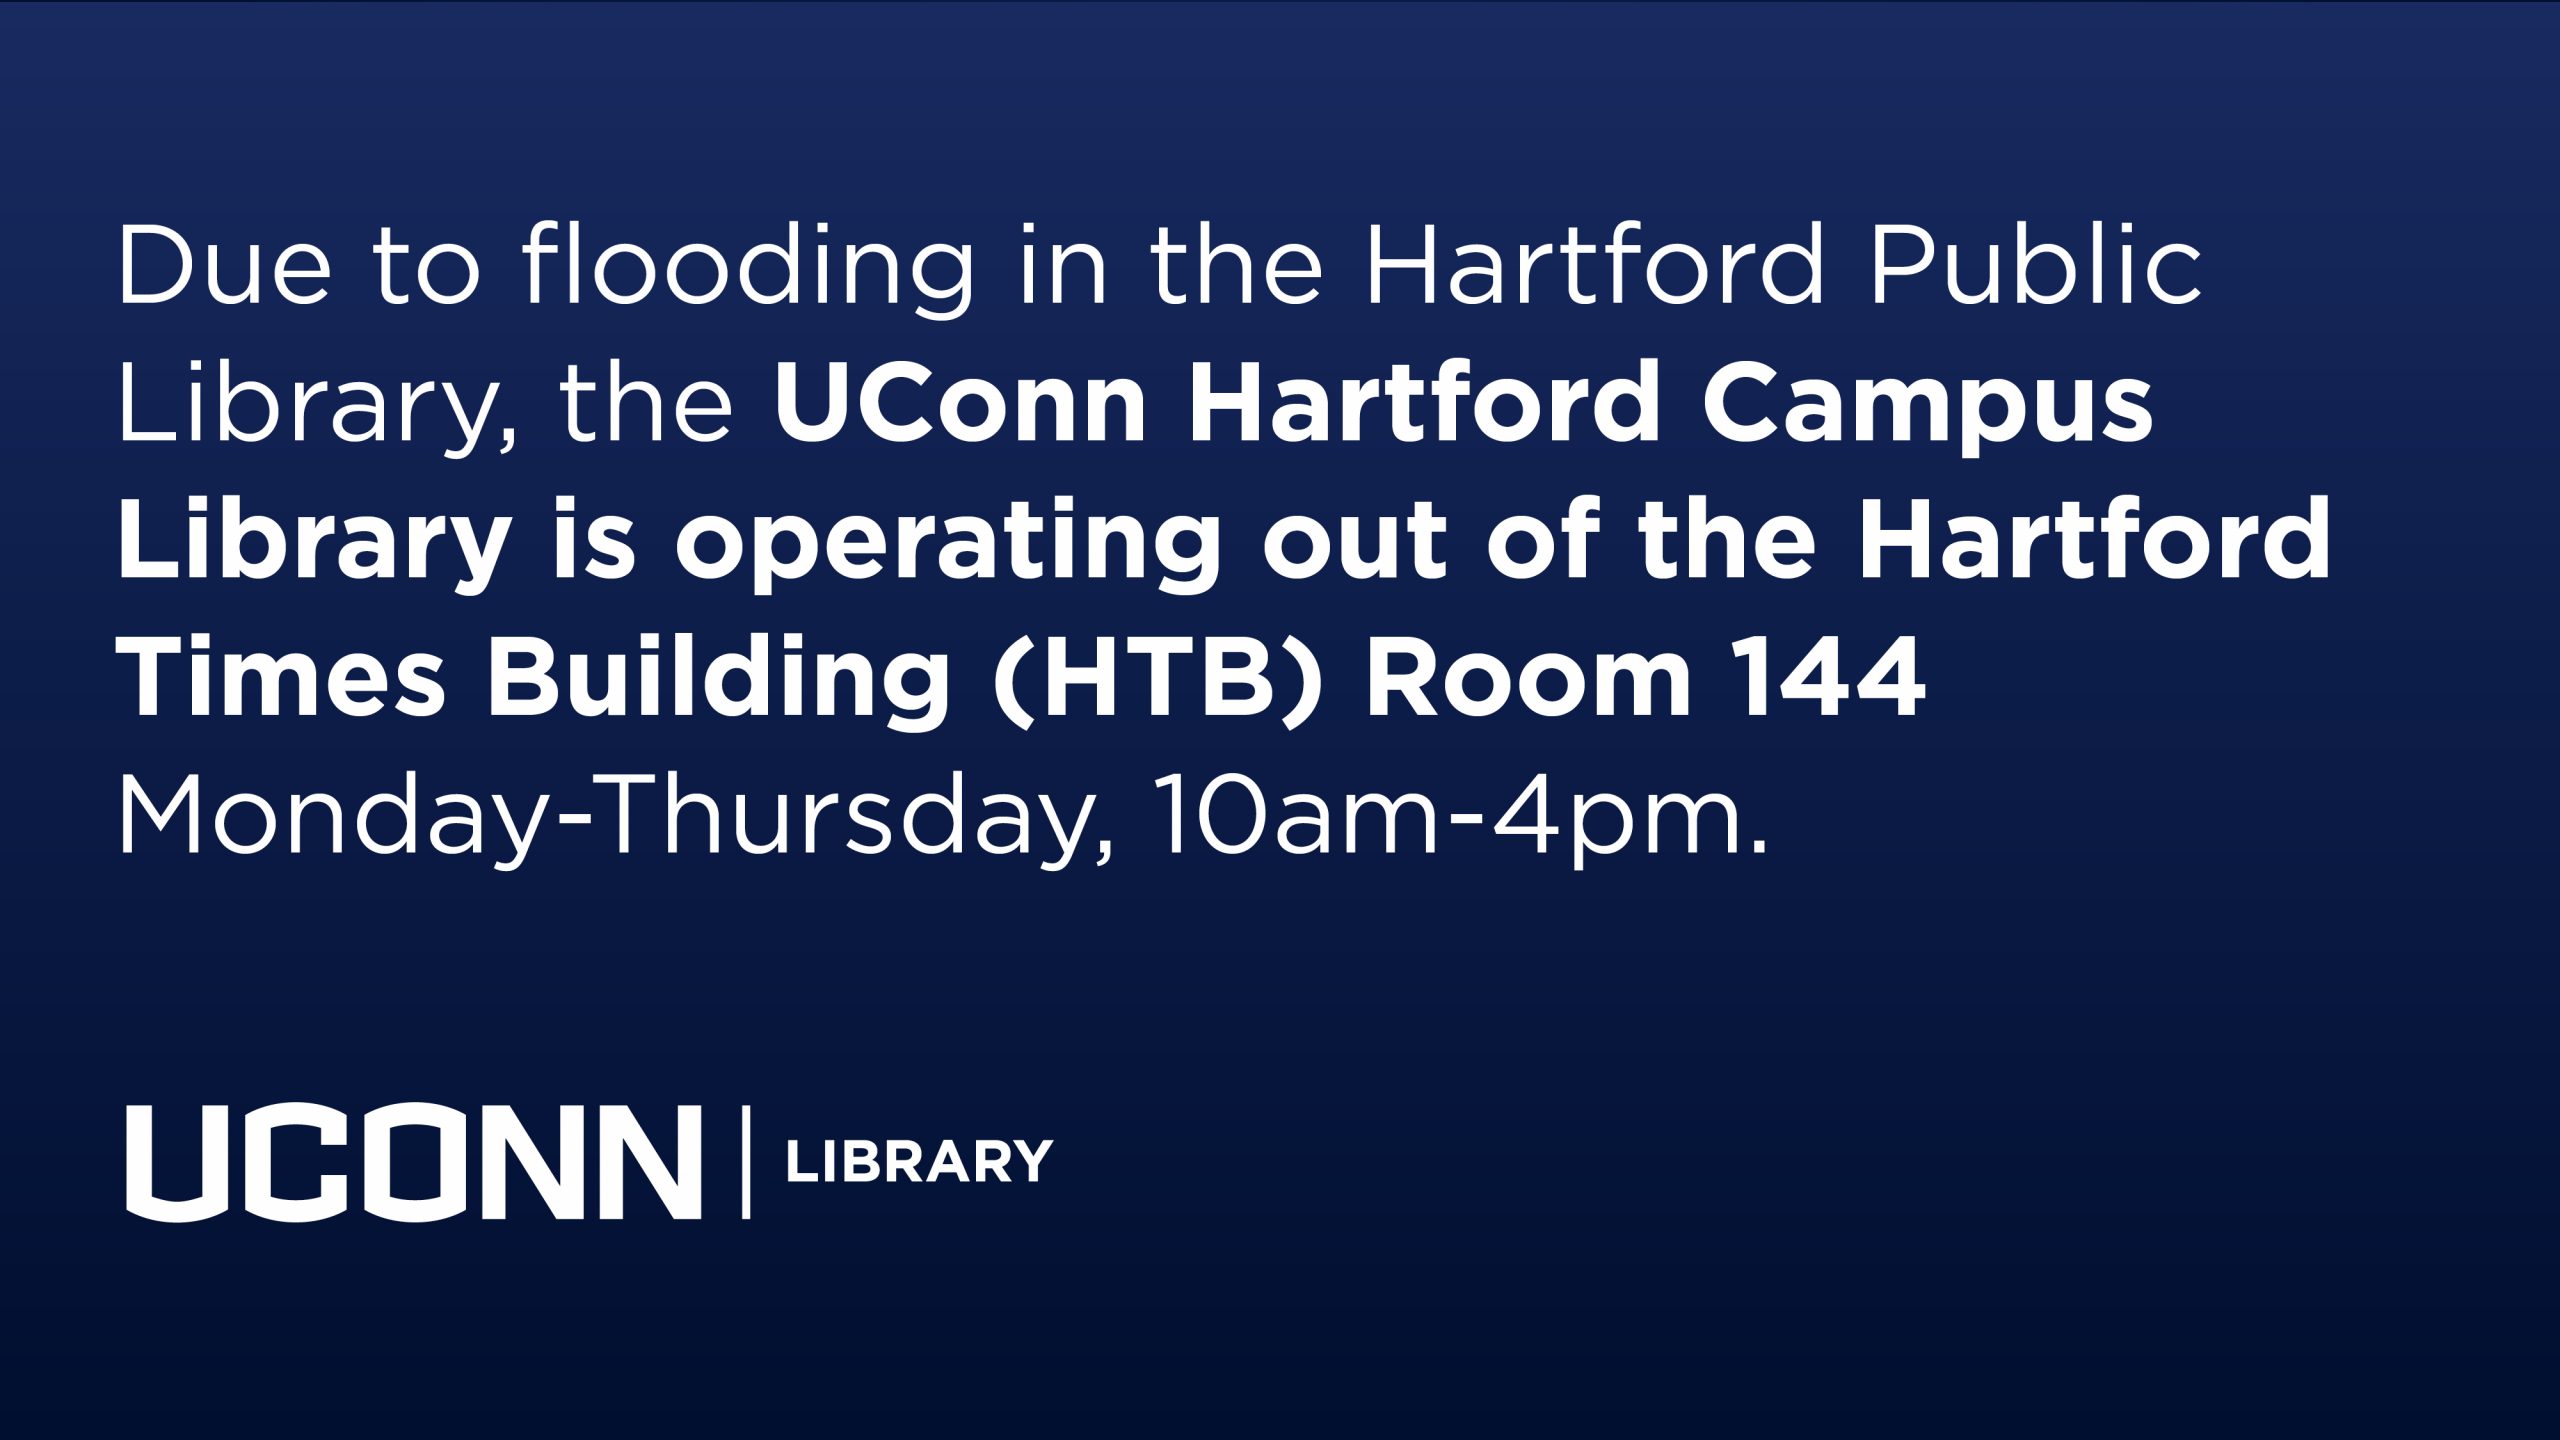 Due to flooding in the Hartford Public Library, the UConn Hartford Campus Library is operating out of the Hartford Times Building, HTB Room 144 Monday-Thursday, 10am-4pm.